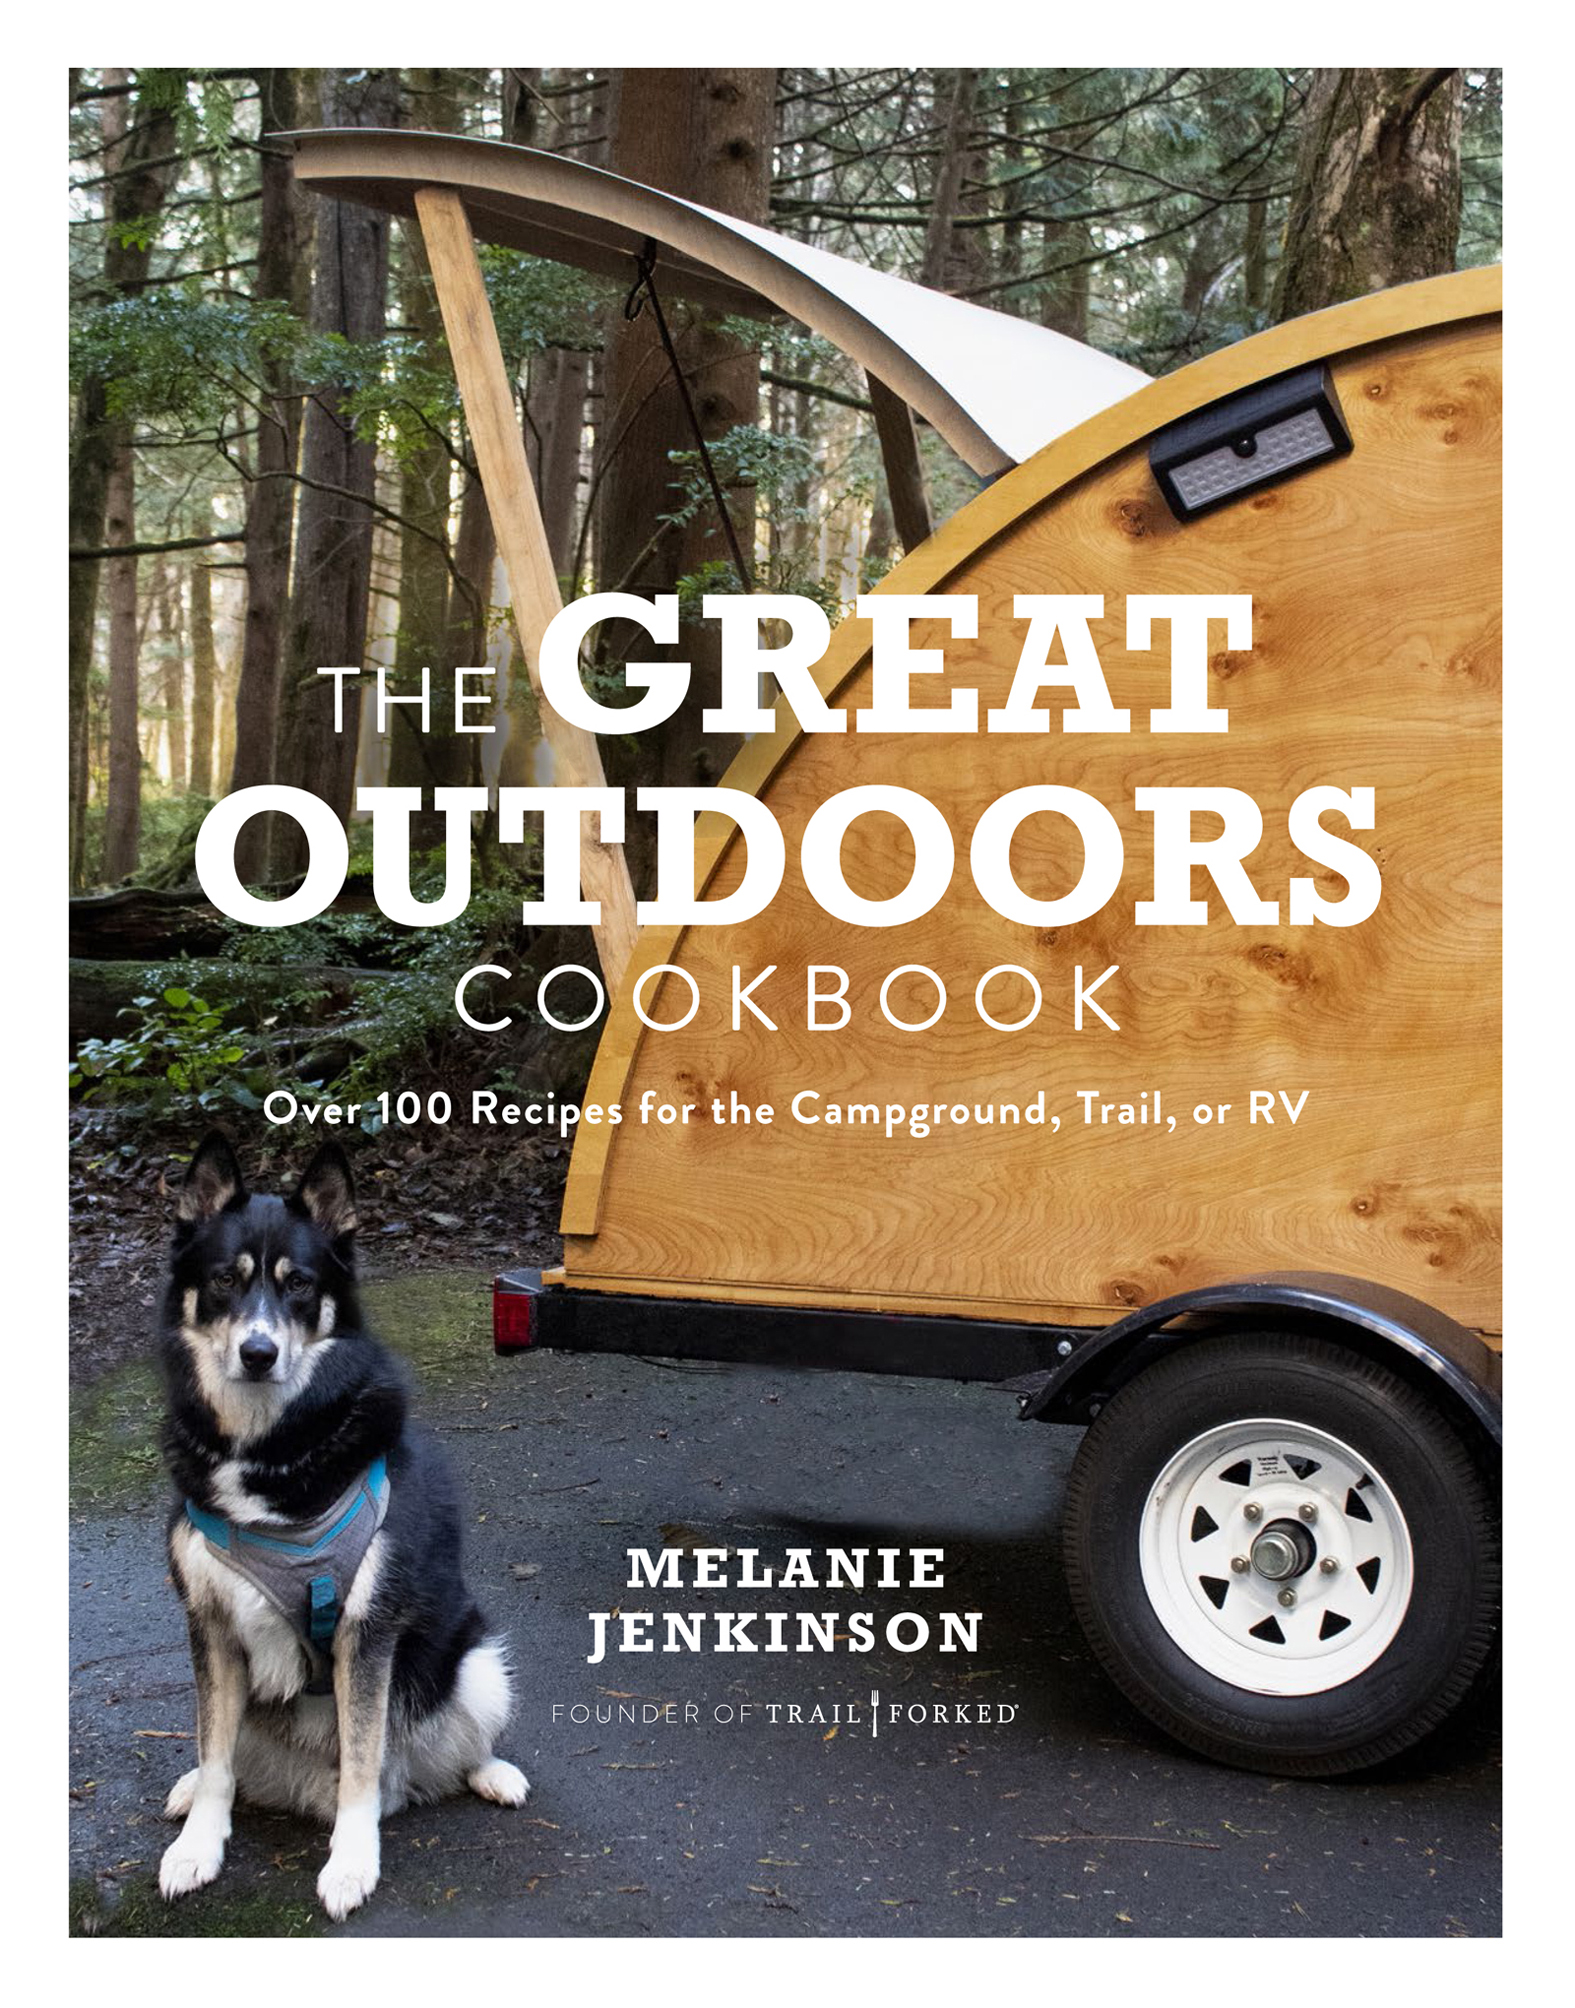 The Great Outdoors Cookbook Over 100 Recipes for the Campground, Trail, or RV